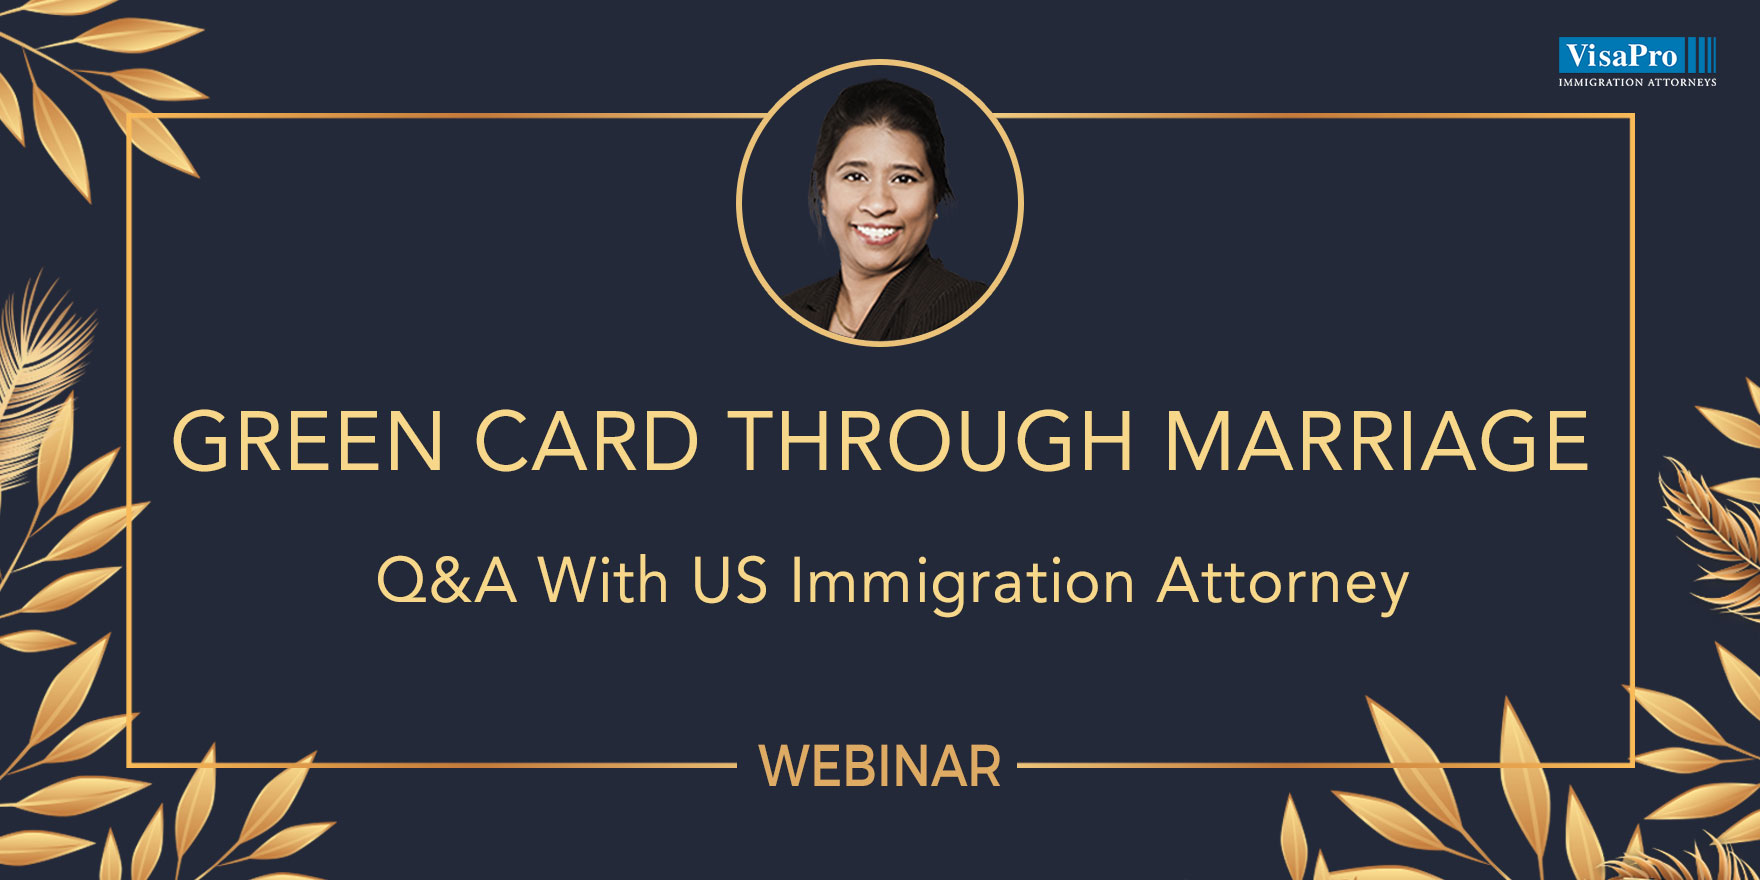 Webinar: Green Card Through Marriage: Q&A With US Immigration Attorney, Online Event